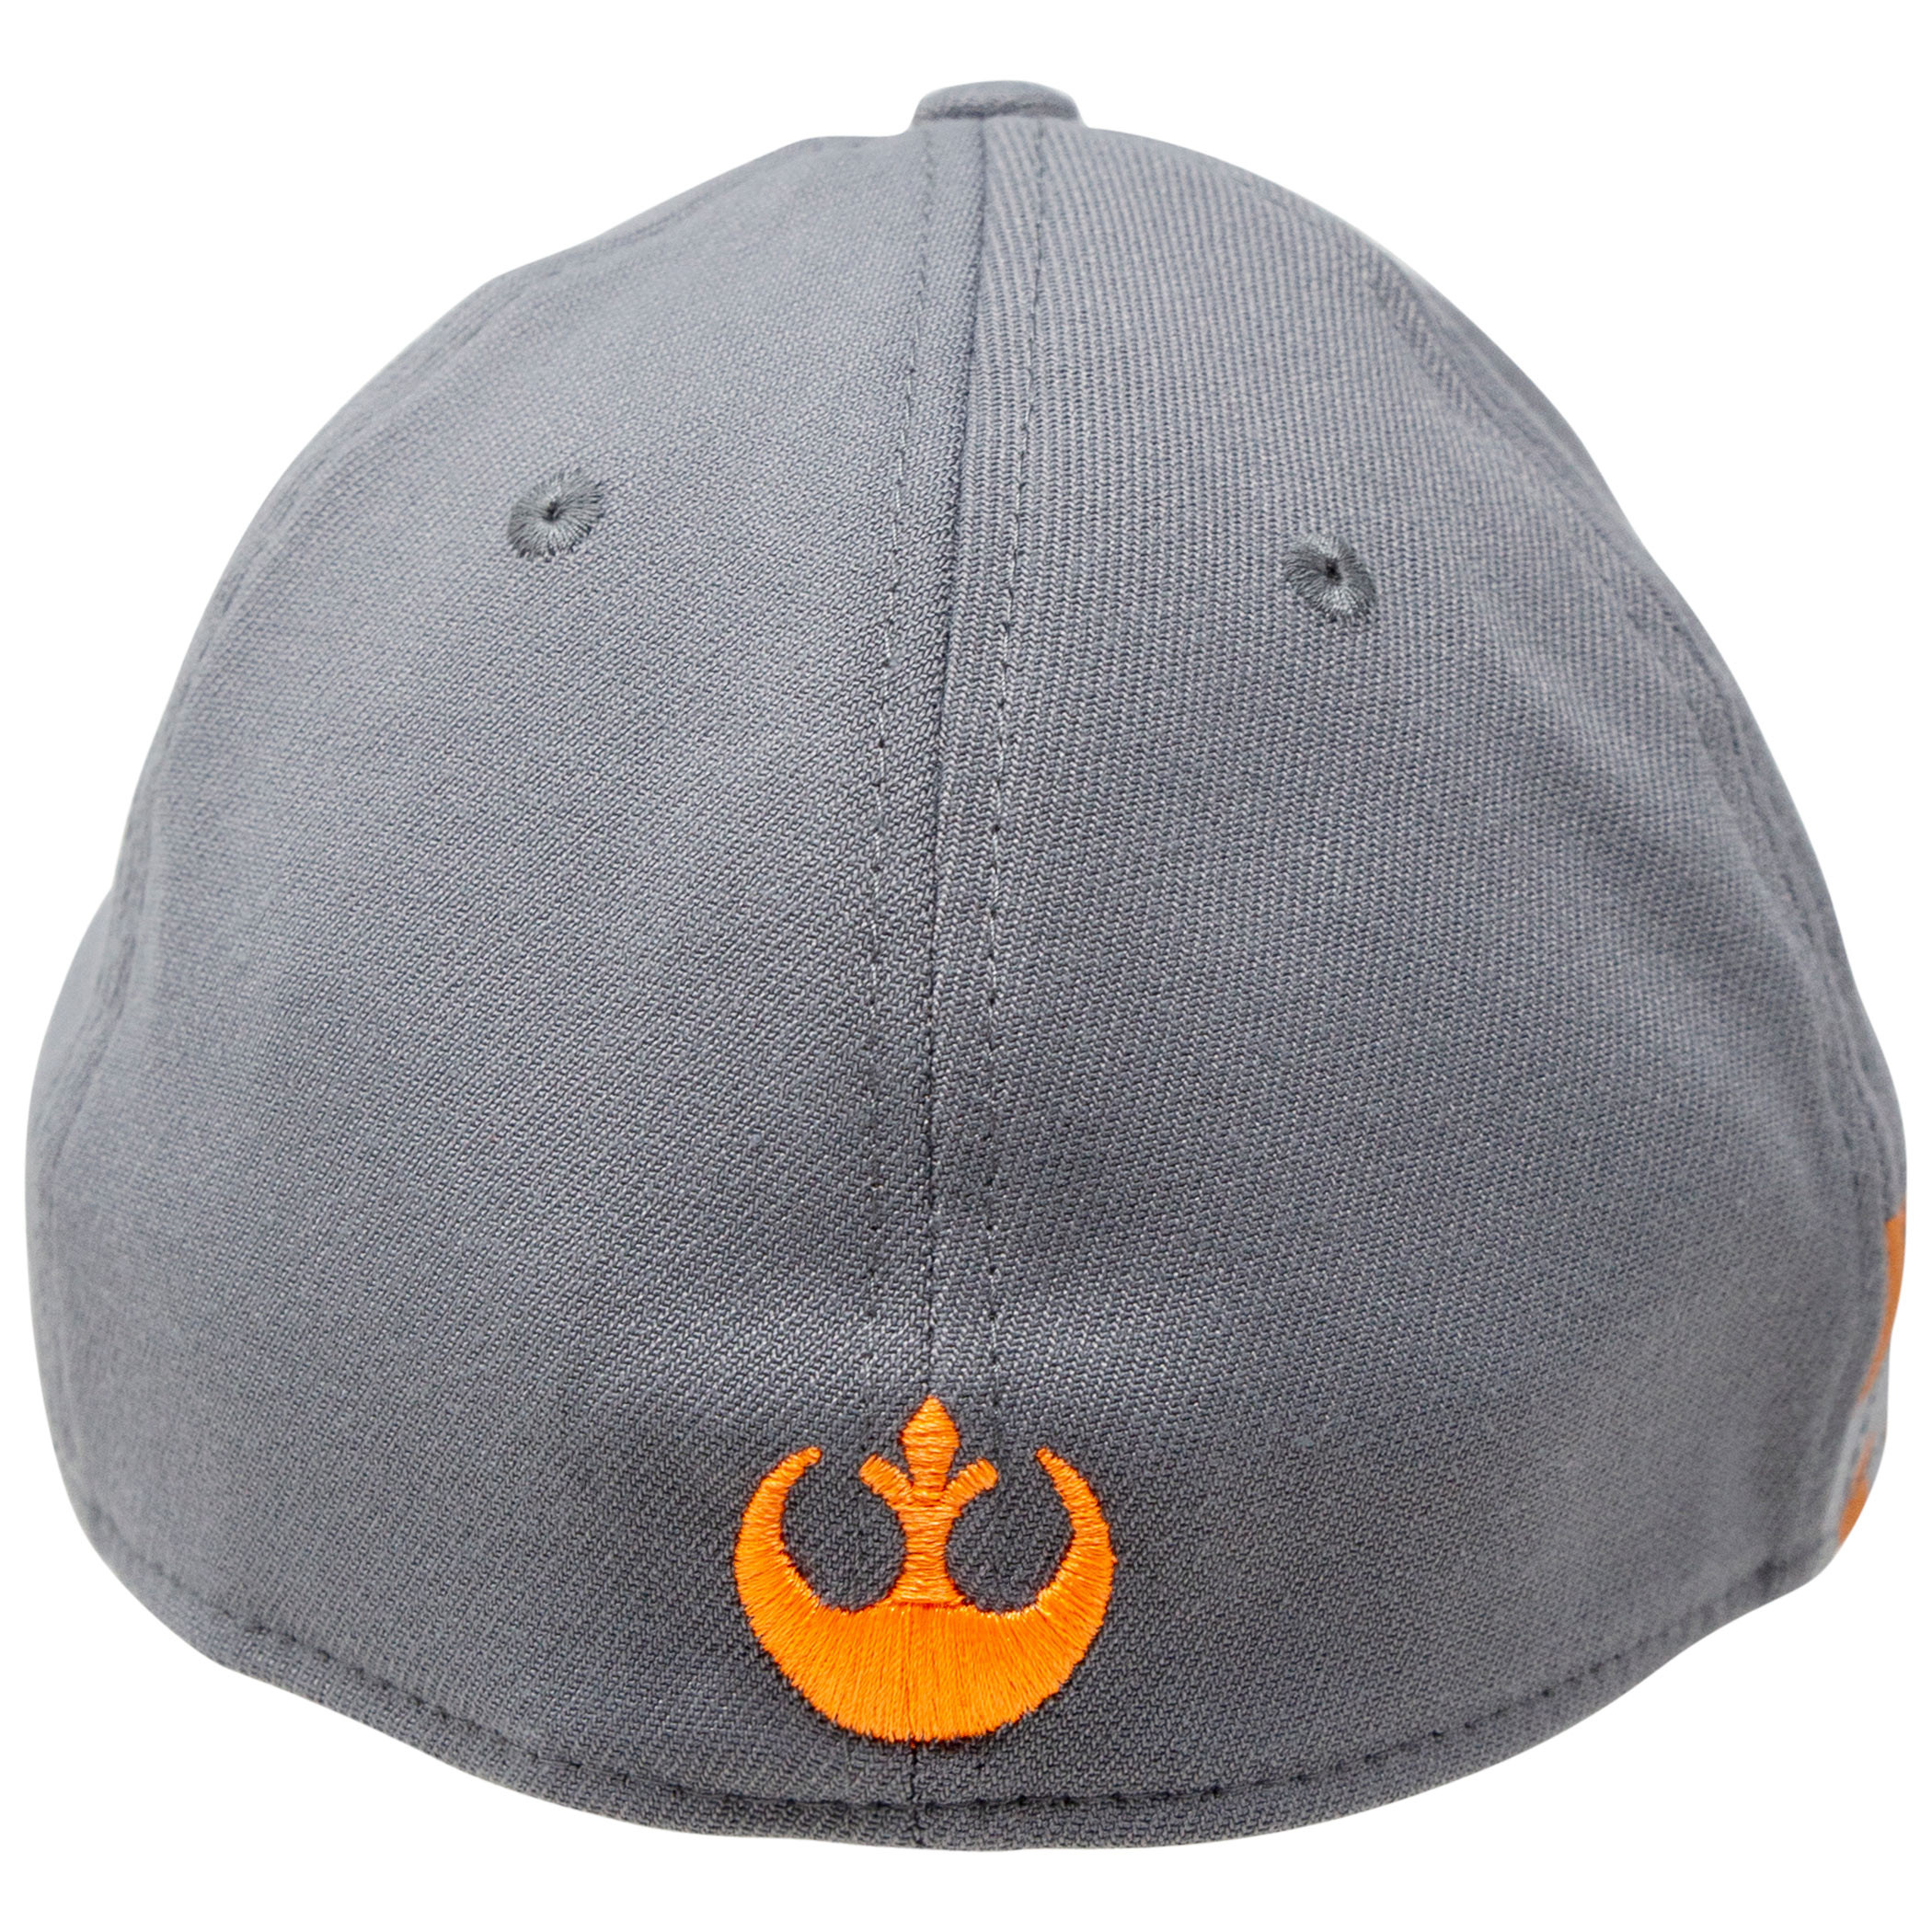 Star Wars The Rise of Skywalker Rebel Training New Era 39Thirty Flex Fitted Hat